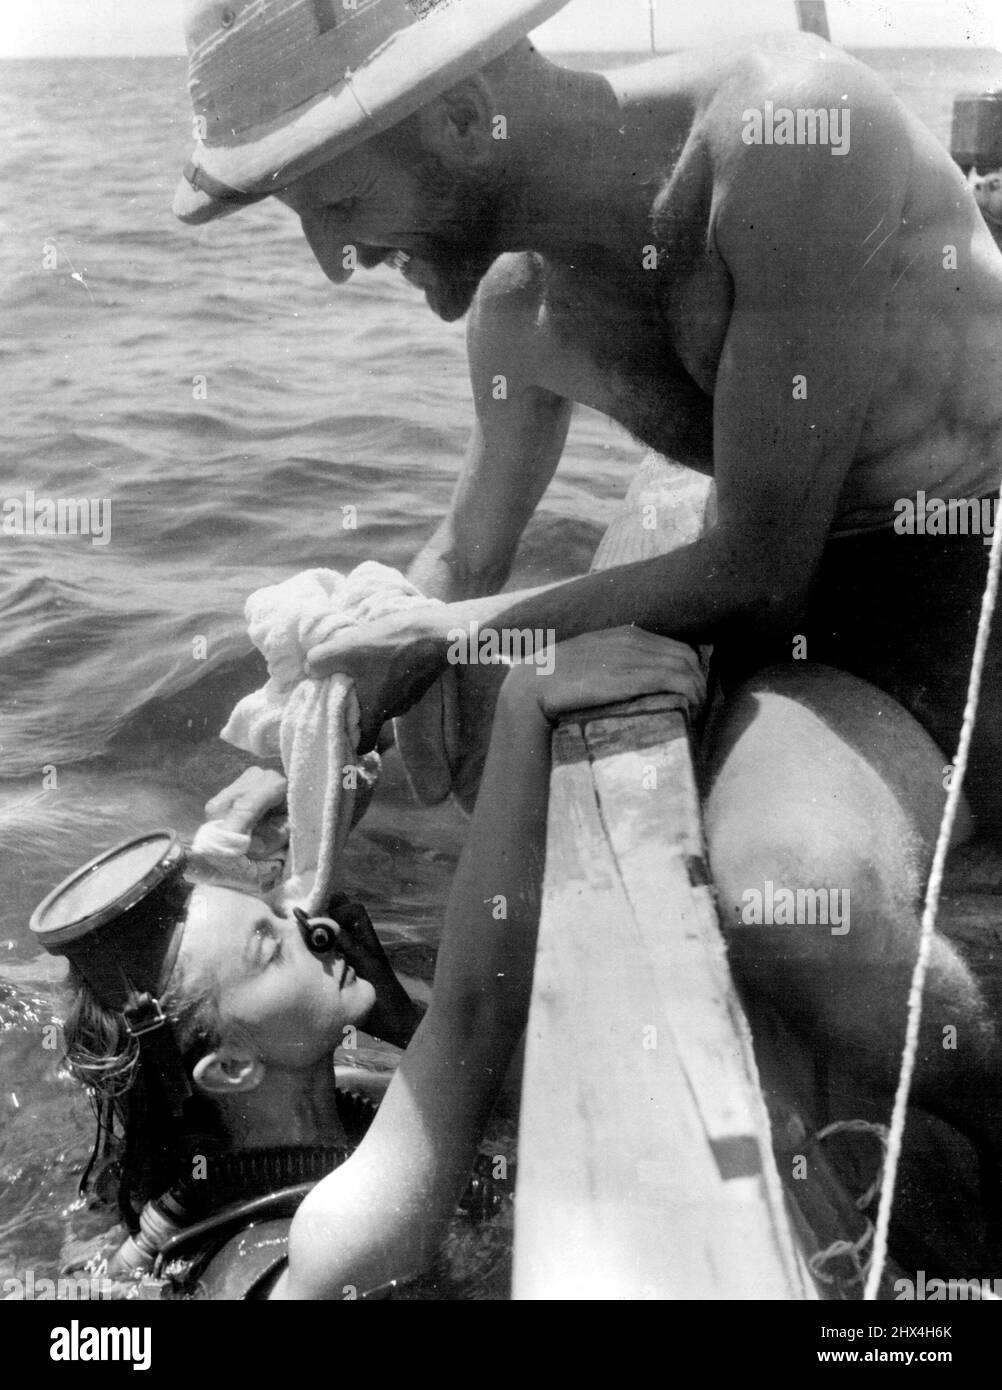 Dr. Hans Hass. Lotte Hass surfaces for a rest during a diving expedition on the Barrier Reef. February 25, 1953. Stock Photo